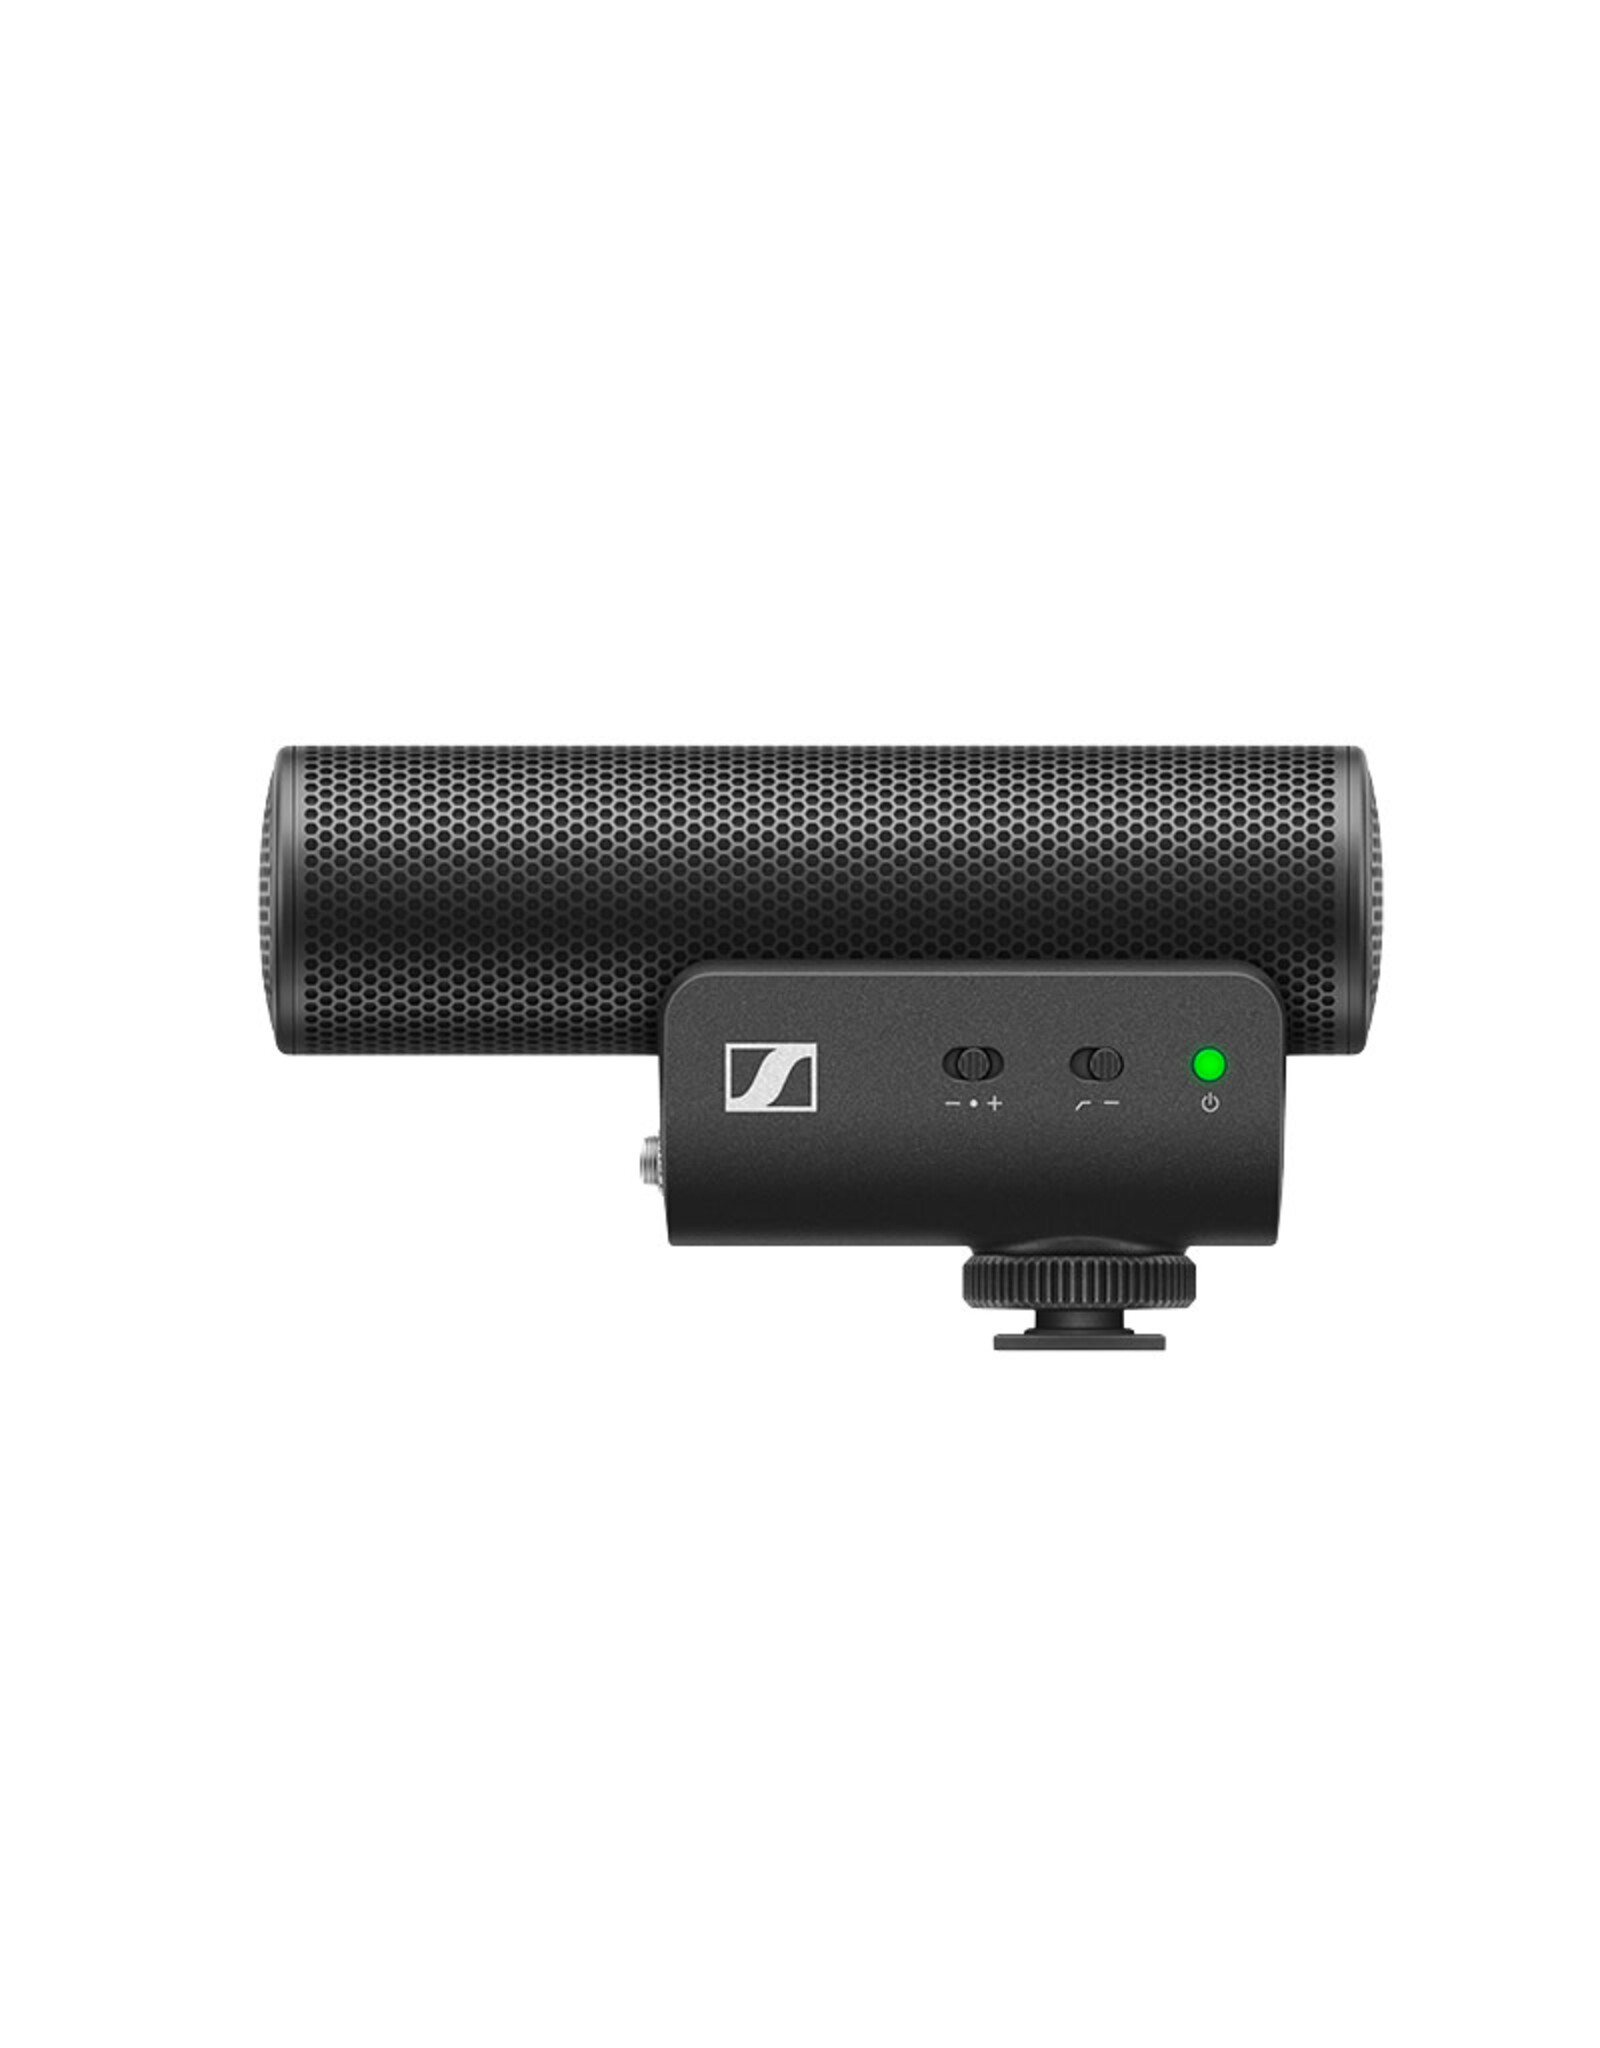 Sennheiser Sennheiser MKE 400 v2 Highly directional on-camera shotgun microphone (supercardioid, condenser) with built-in wind protection and shock absorption for enhanced in-camera audio